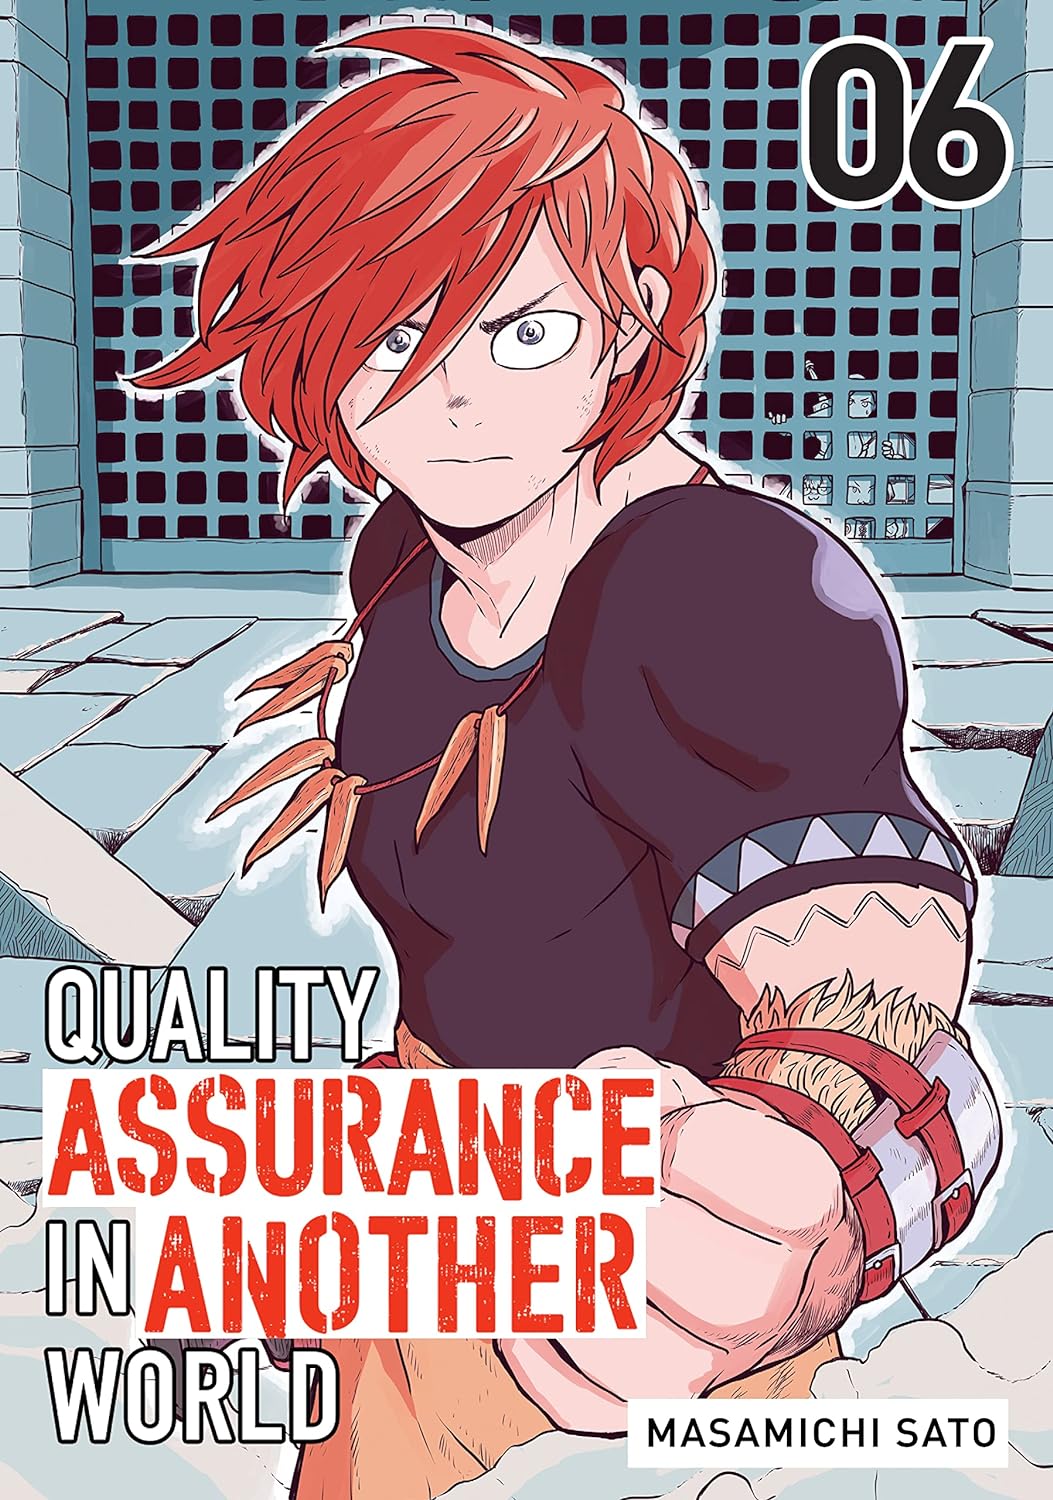 Quality Assurance in Another World Vol. 06